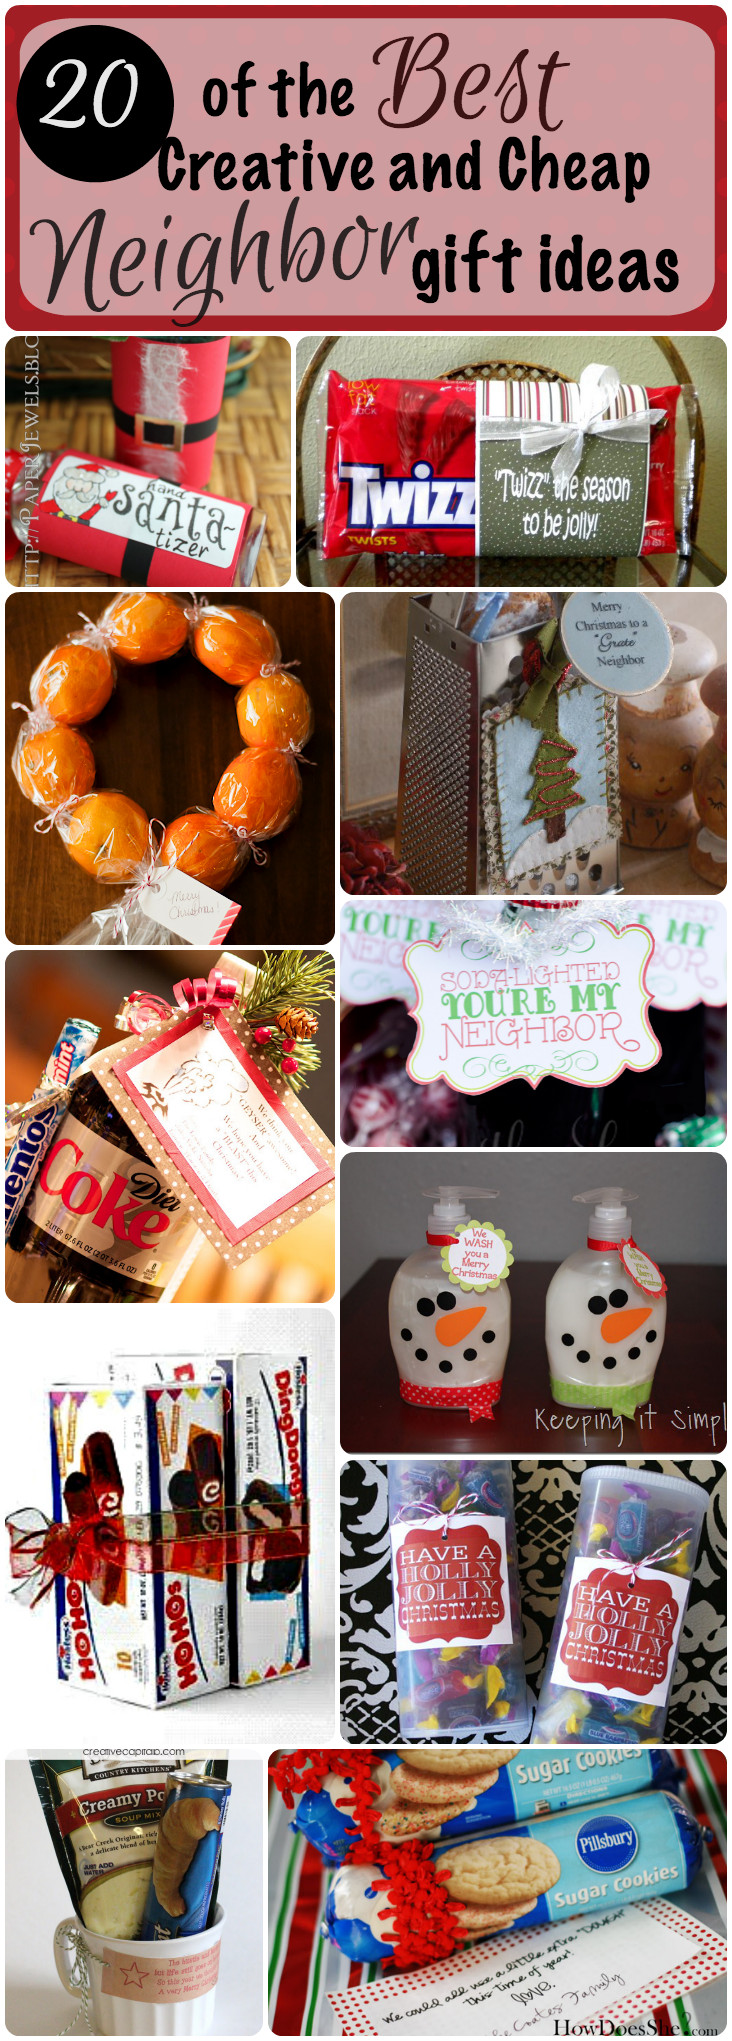 Good Holiday Gift Ideas
 20 Best Creative And Cheap Neighbor Gifts For Christmas